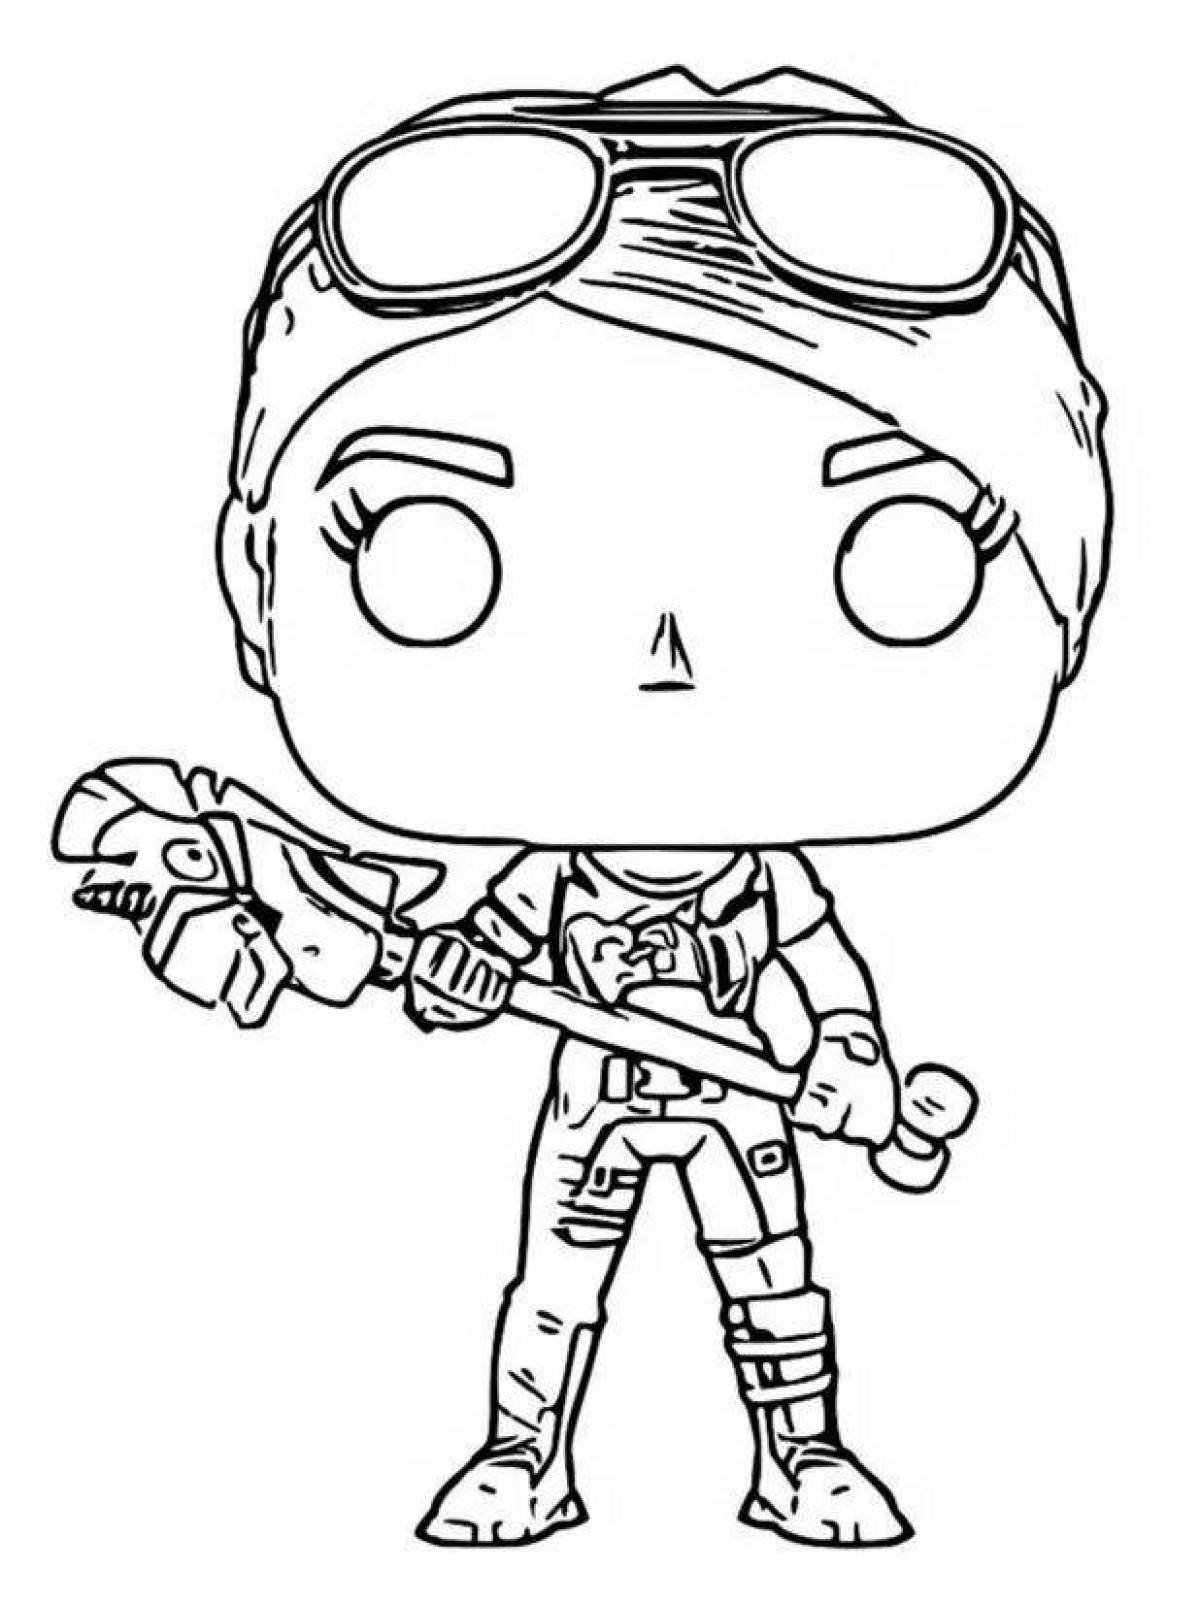 Colorful funko pop coloring page